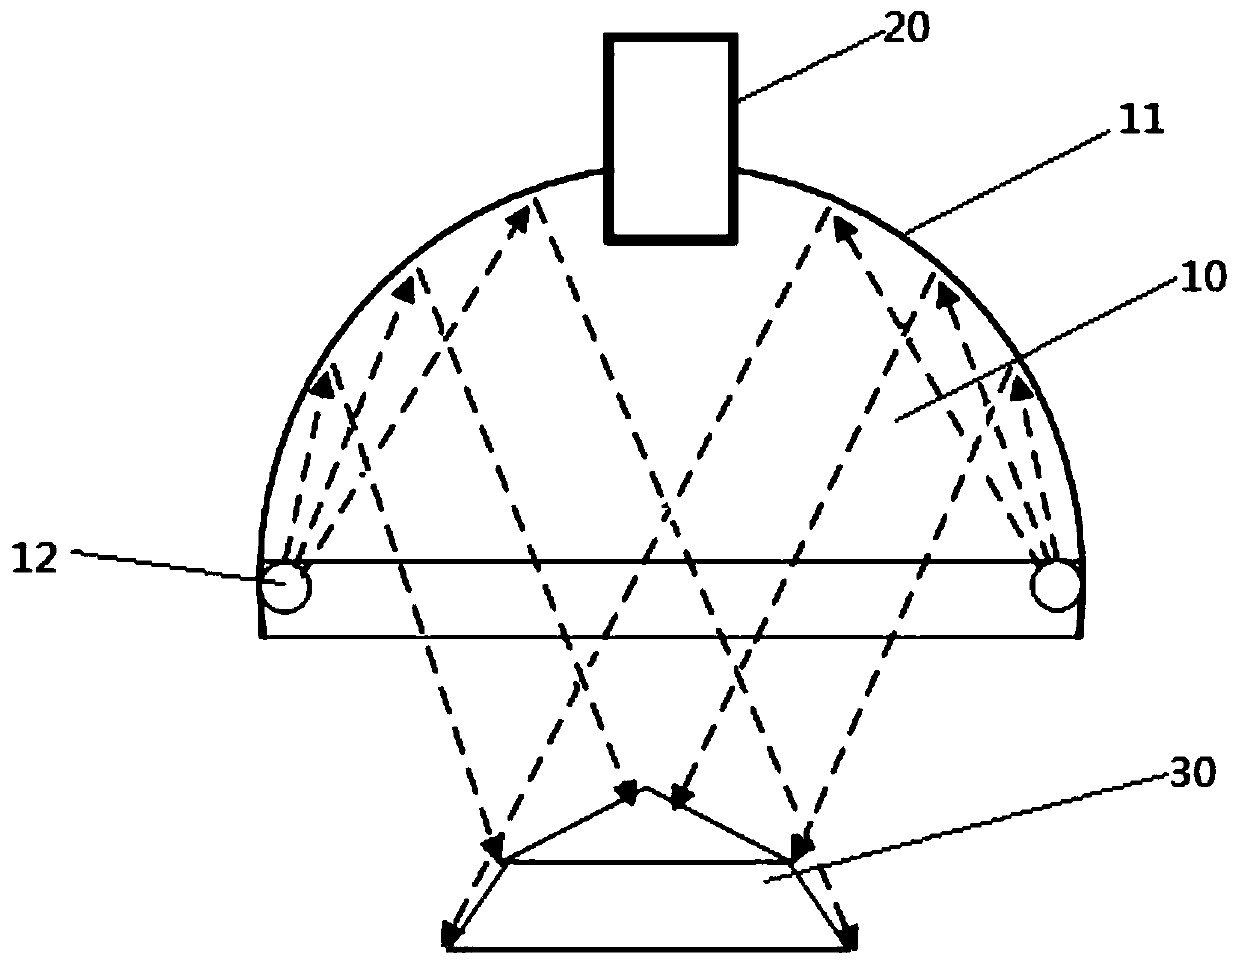 Illumination device used for object inspection